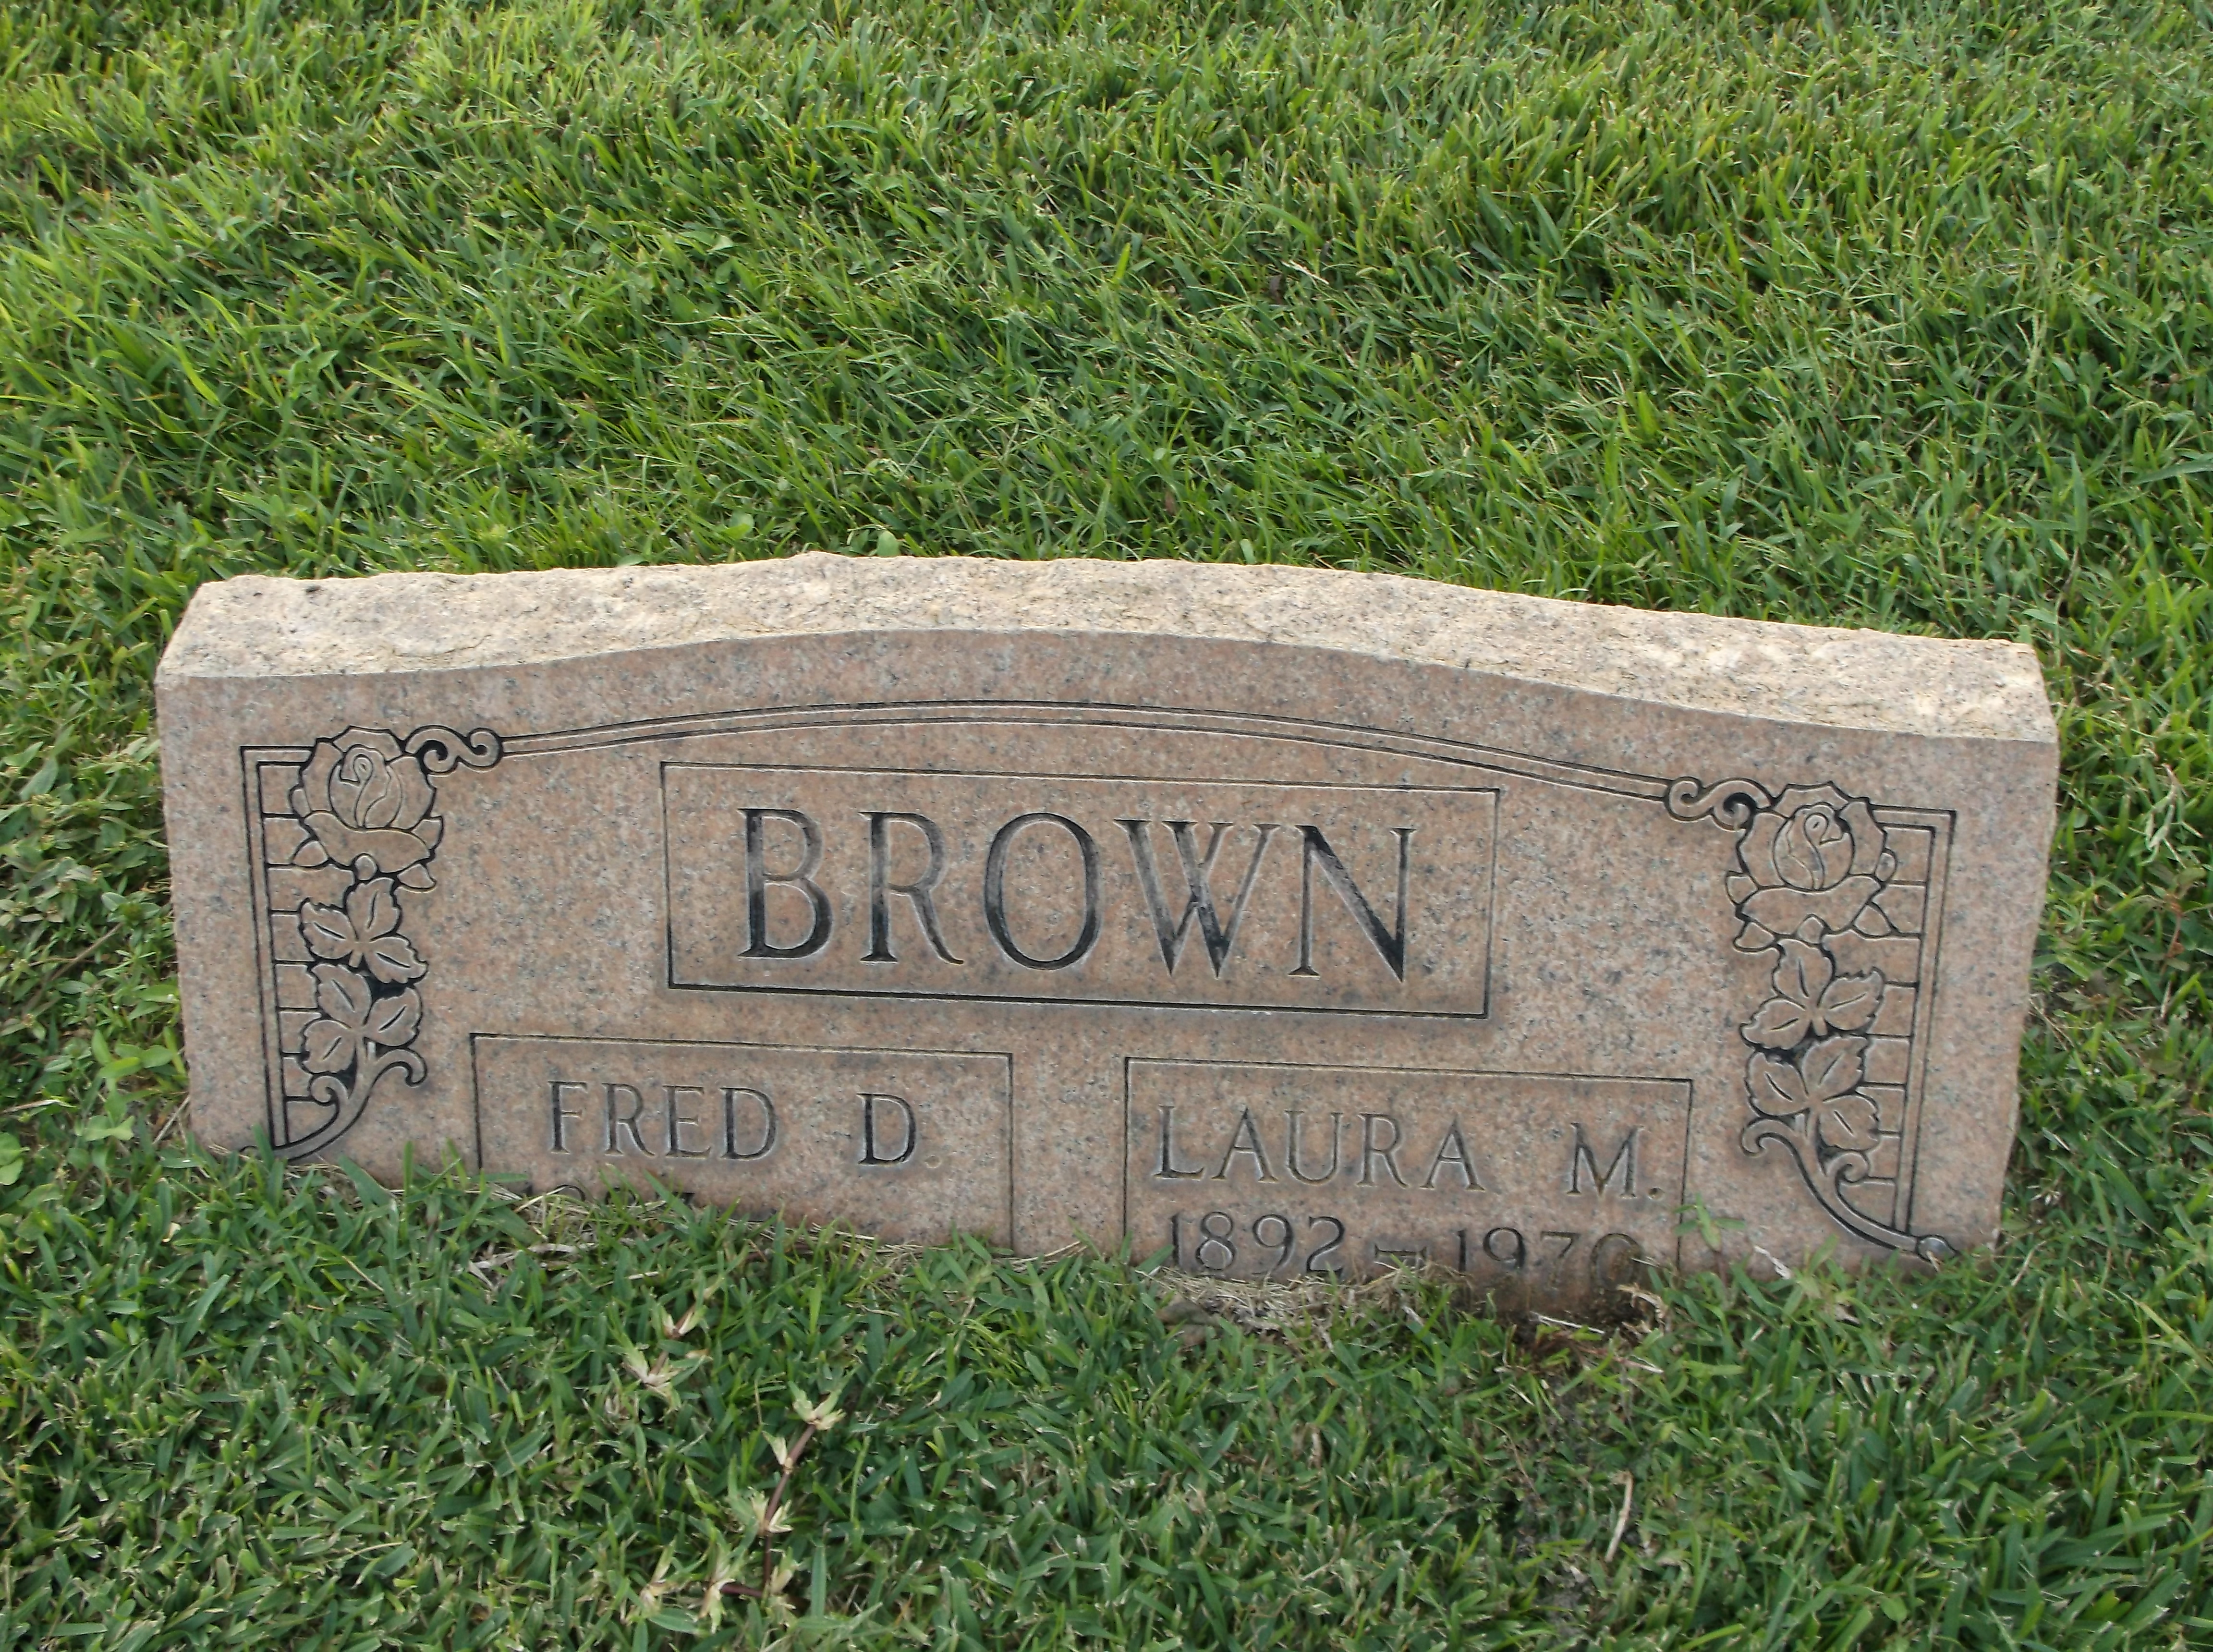 Fred D Brown